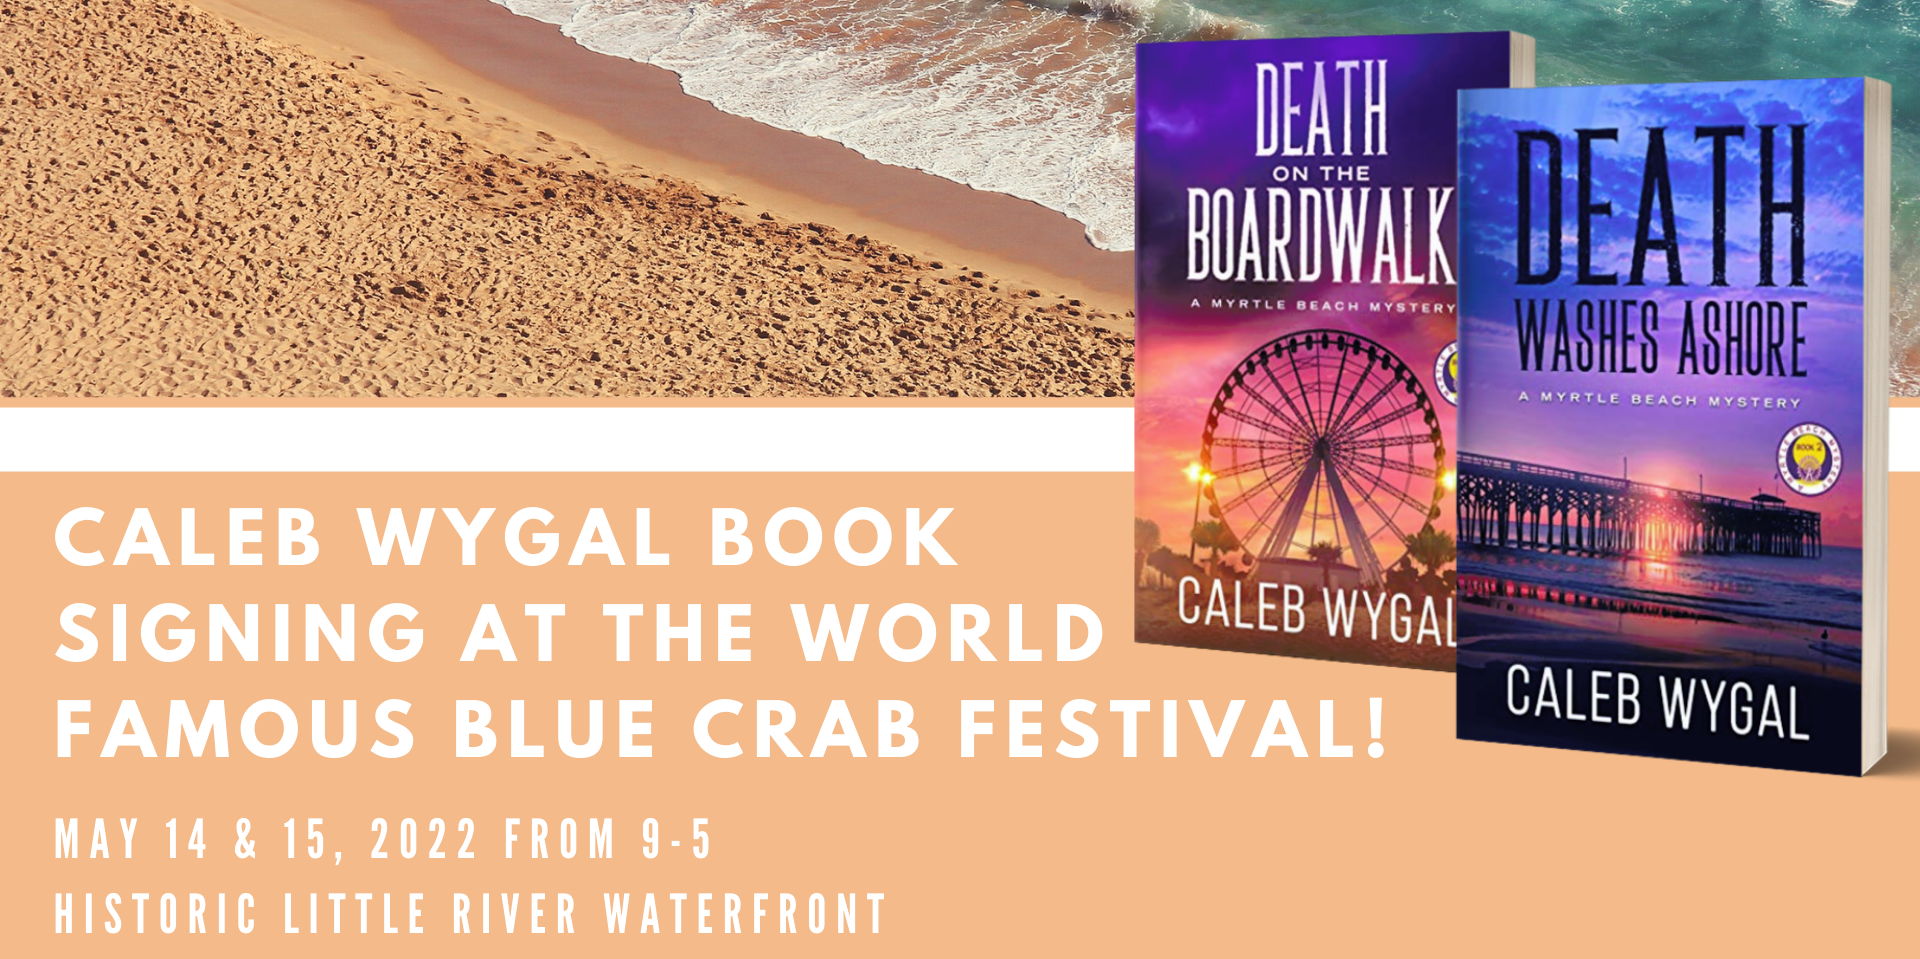 Caleb Wygal Book Signing at the World Famous Blue Crab Festival! promotional image